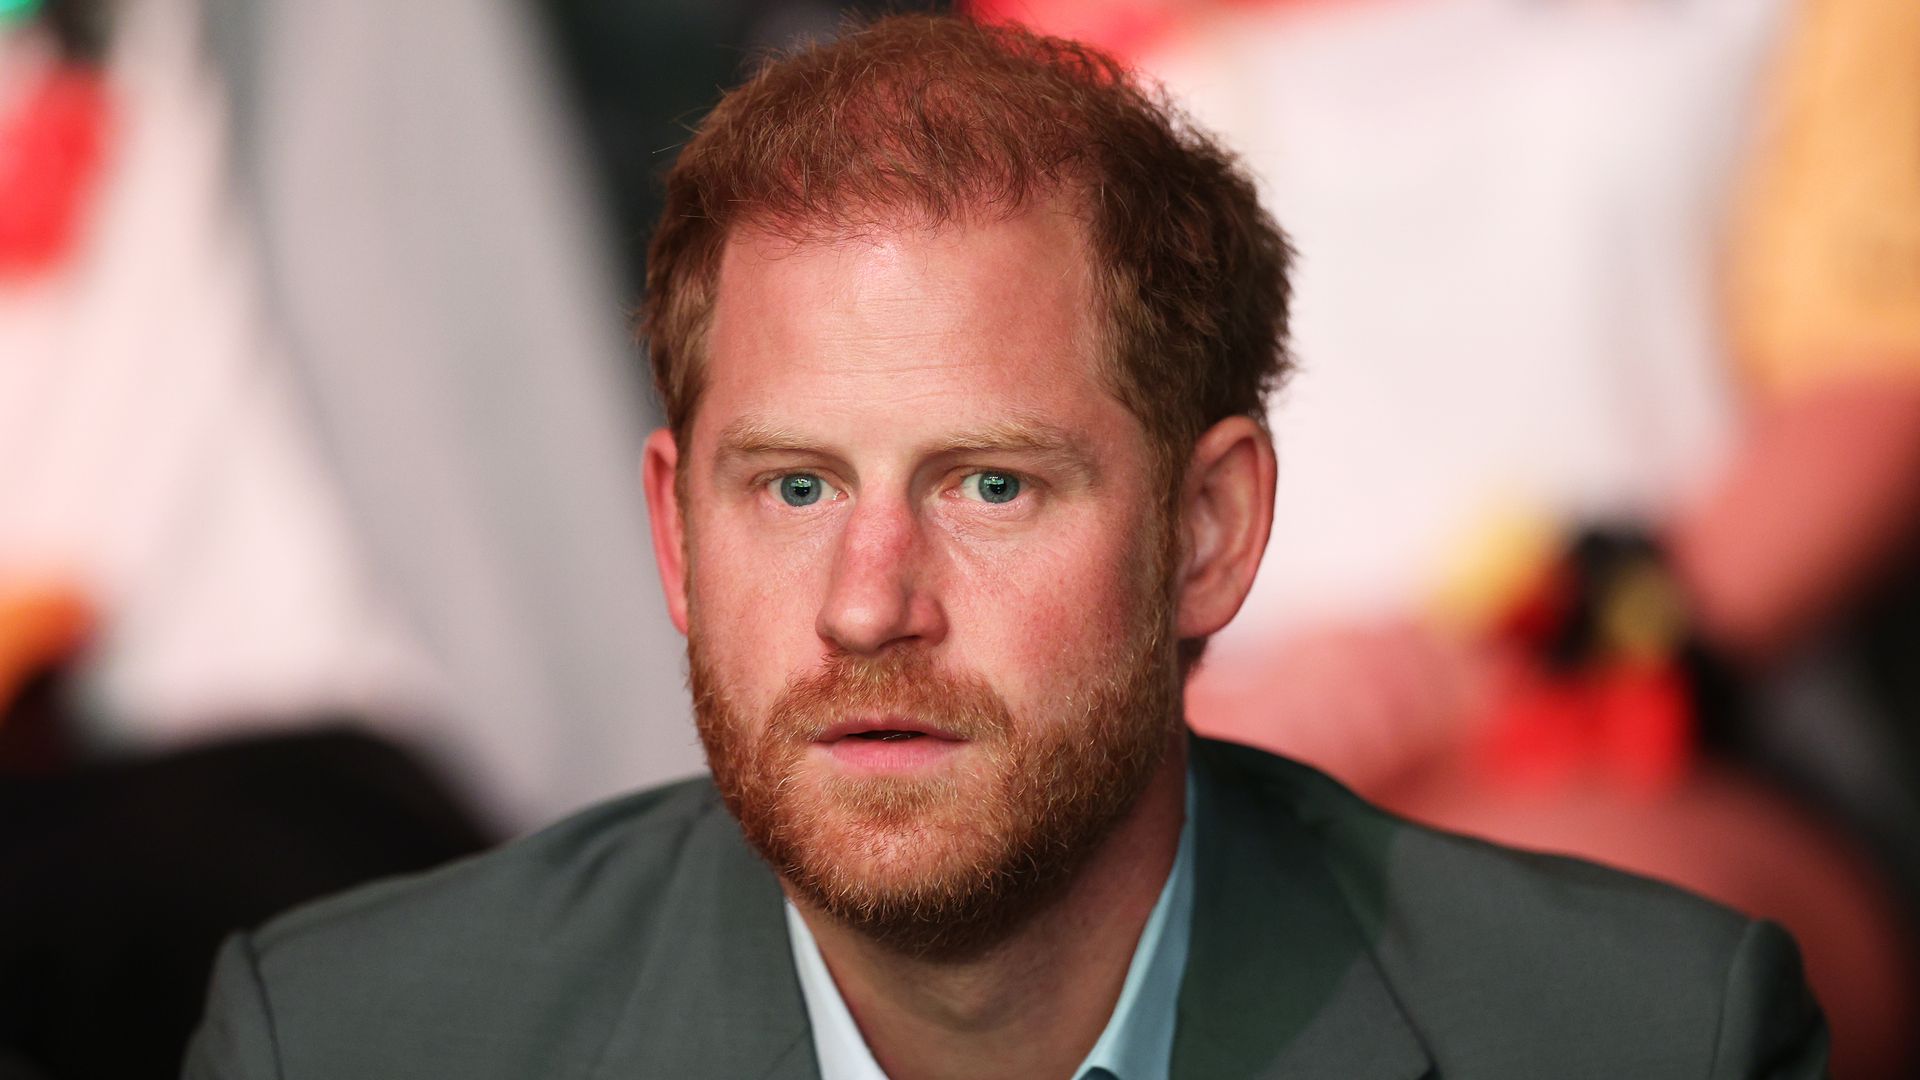 Prince Harry loses bid to appeal in latest High Court case over UK security